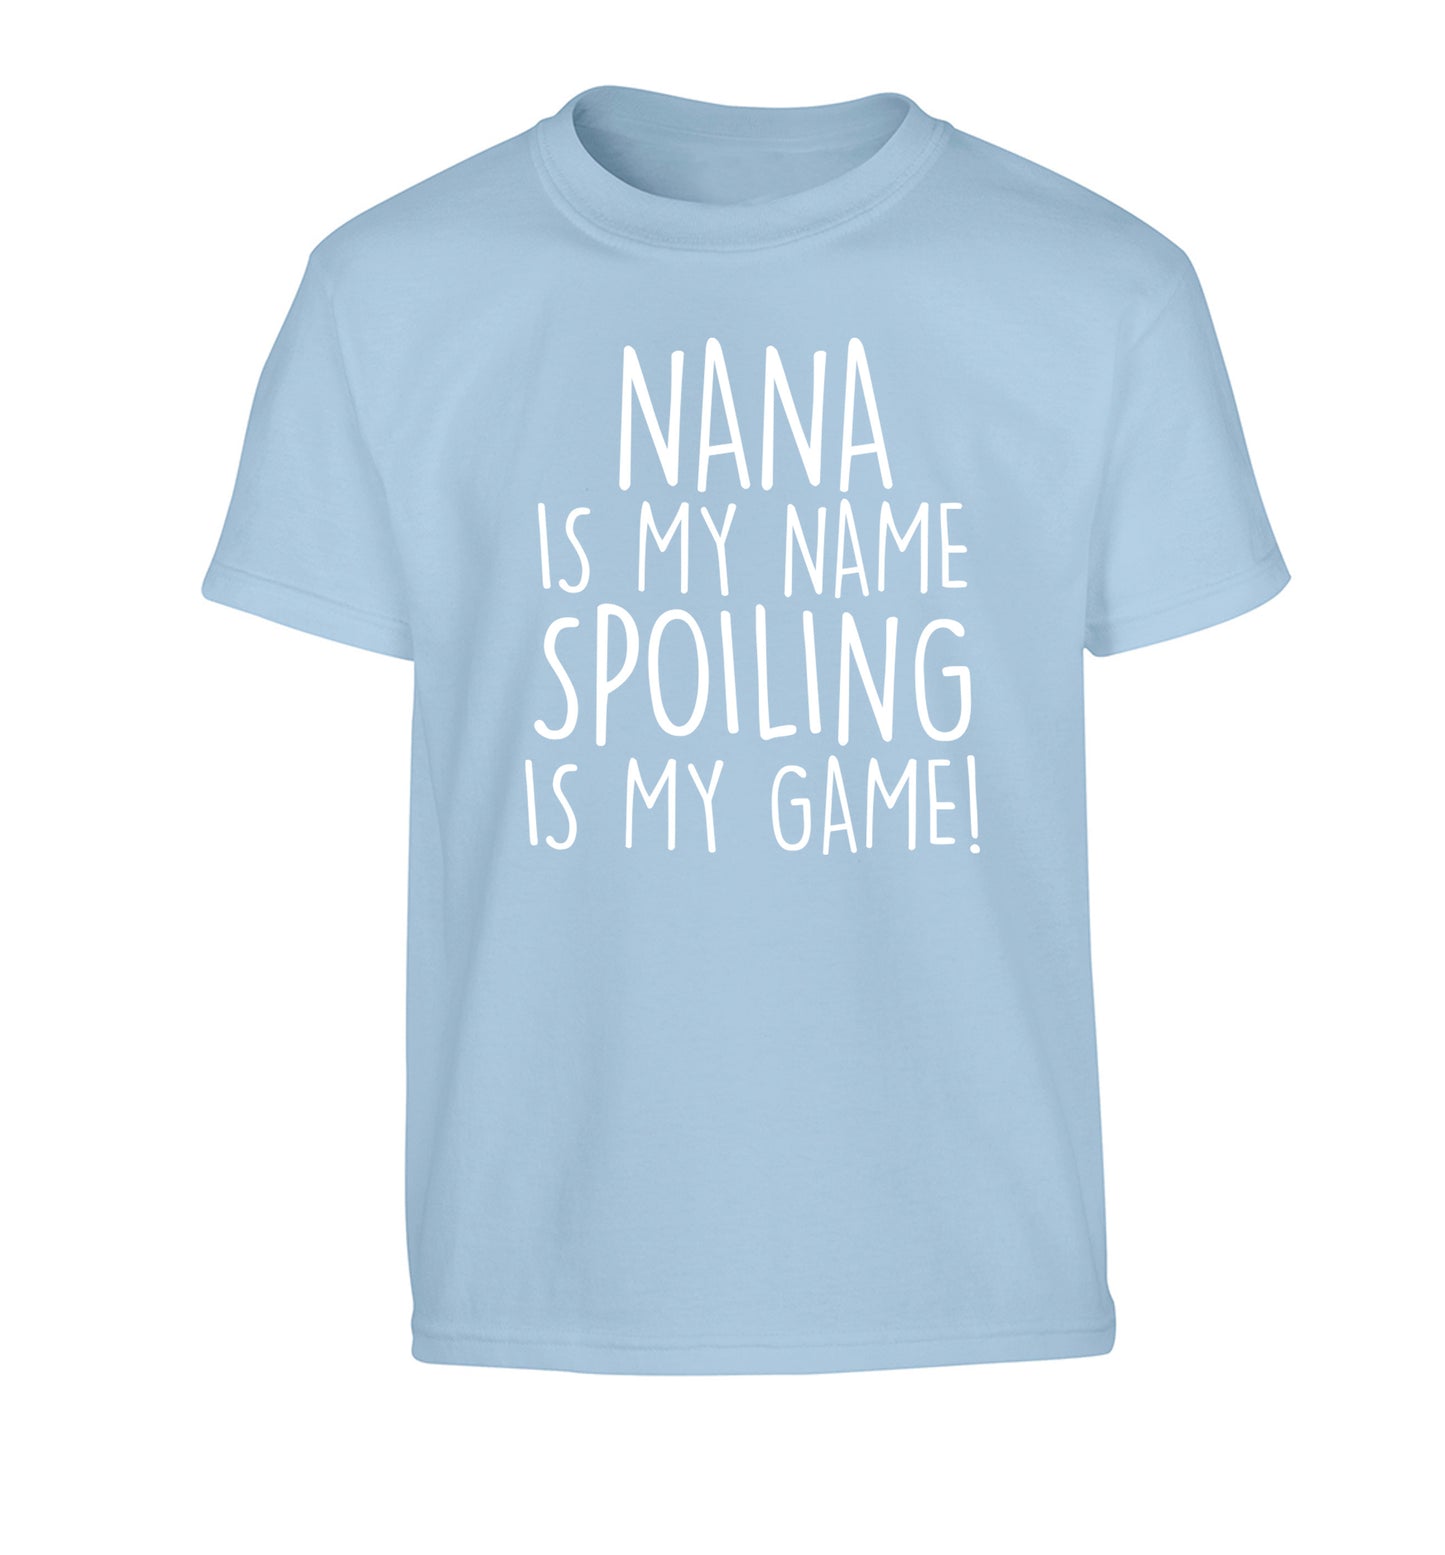 Nana is my name, spoiling is my game Children's light blue Tshirt 12-14 Years